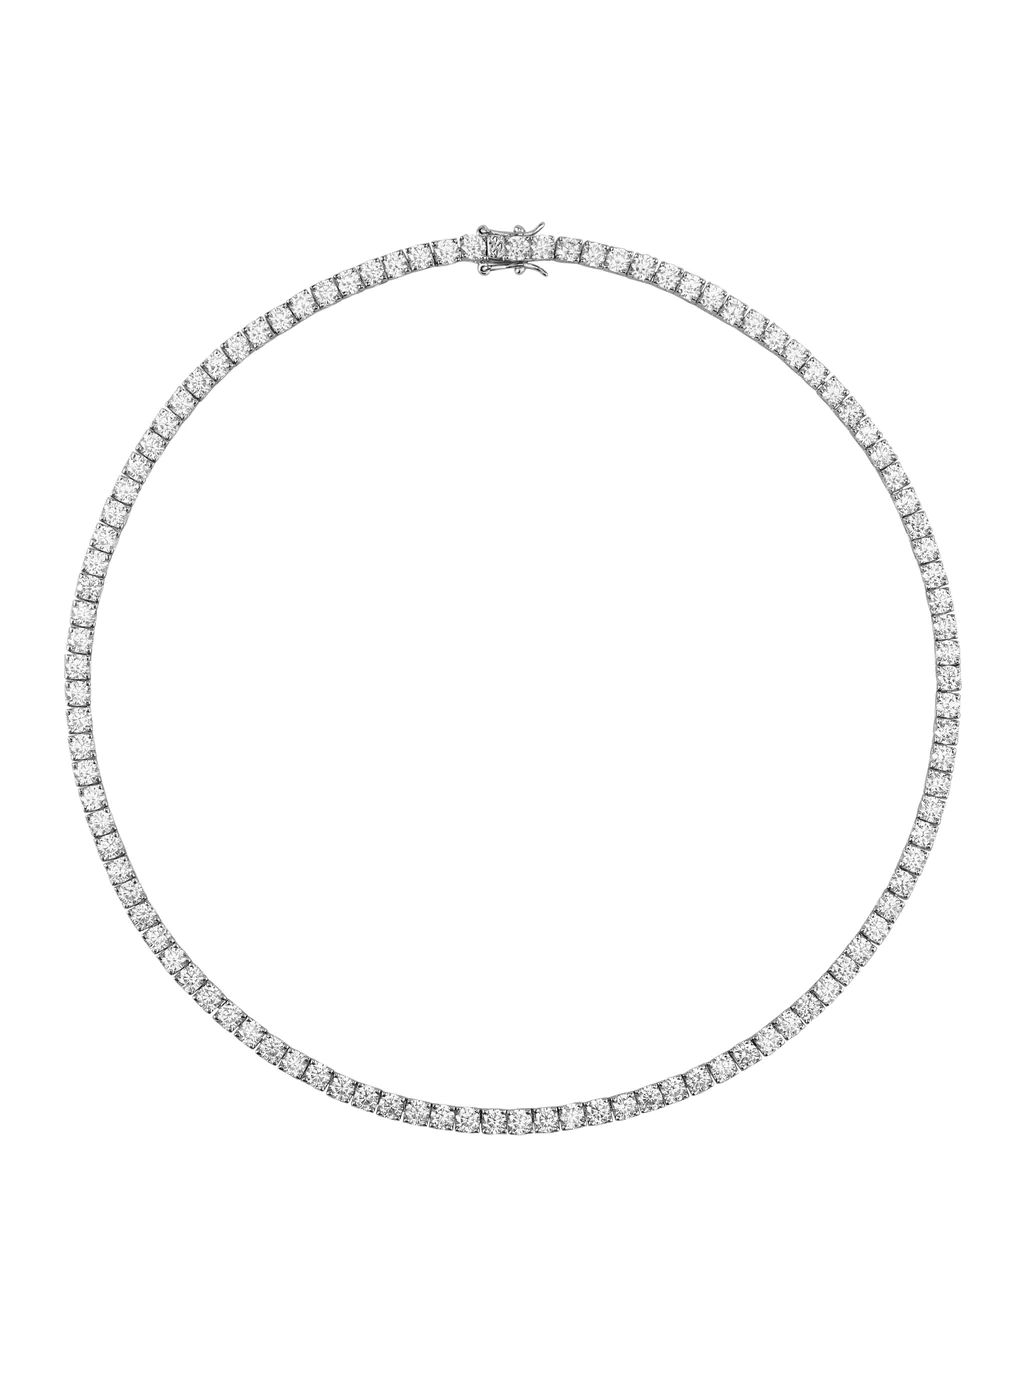 KATE ROUND CUT, LAB-GROWN WHITE SAPPHIRE SILVER RIVIERE NECKLACE | Dorsey